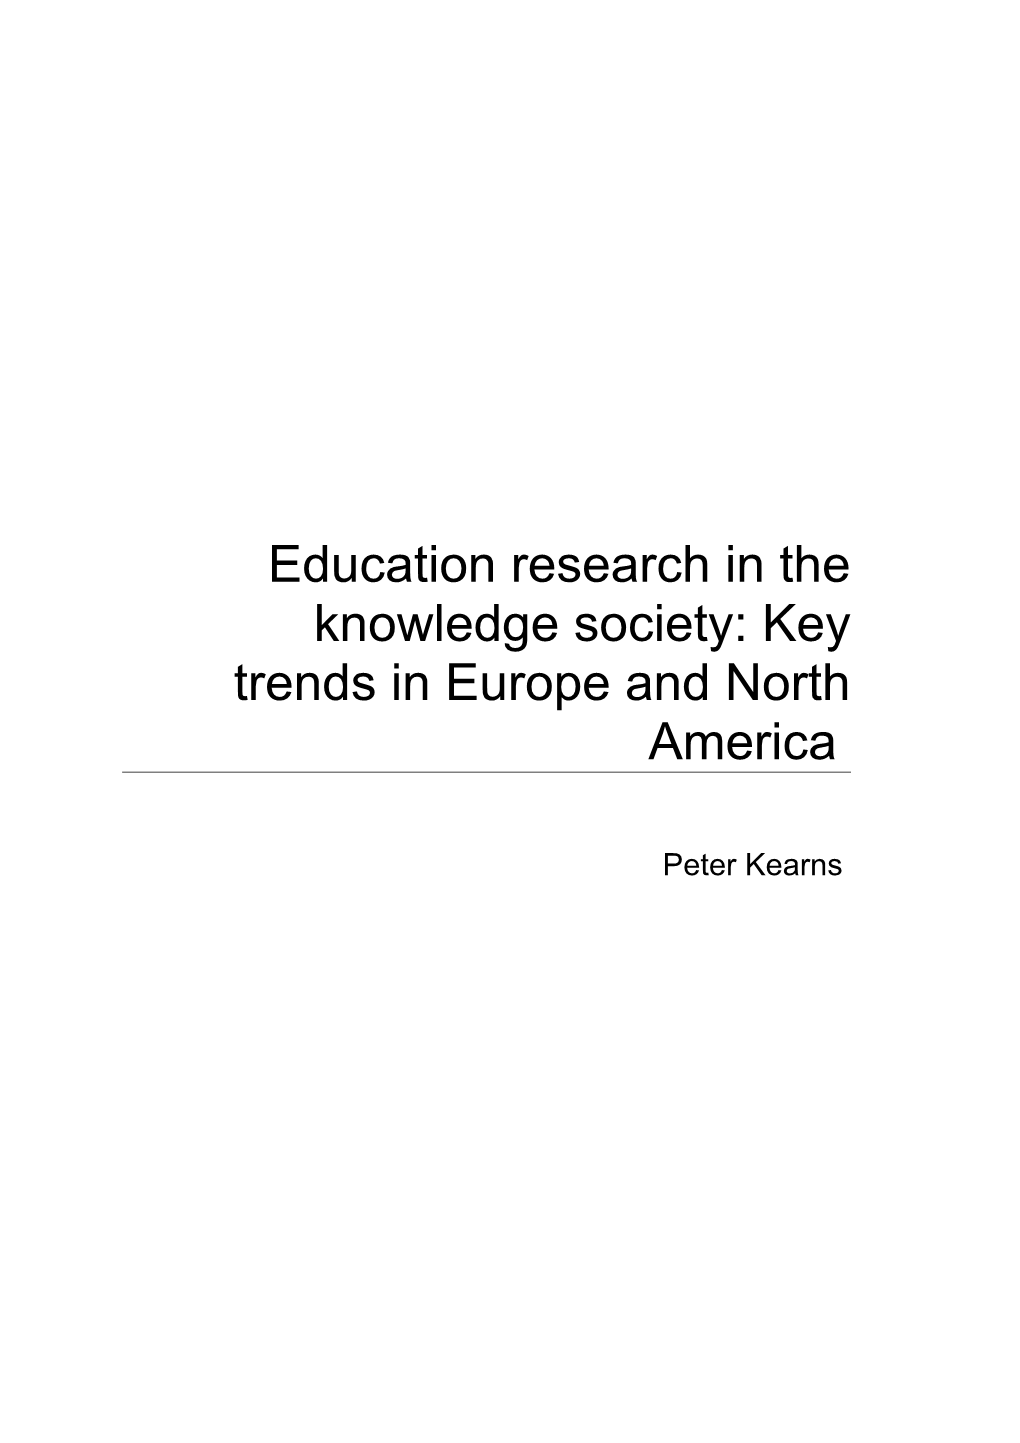 Education Research in the Knowledge Society